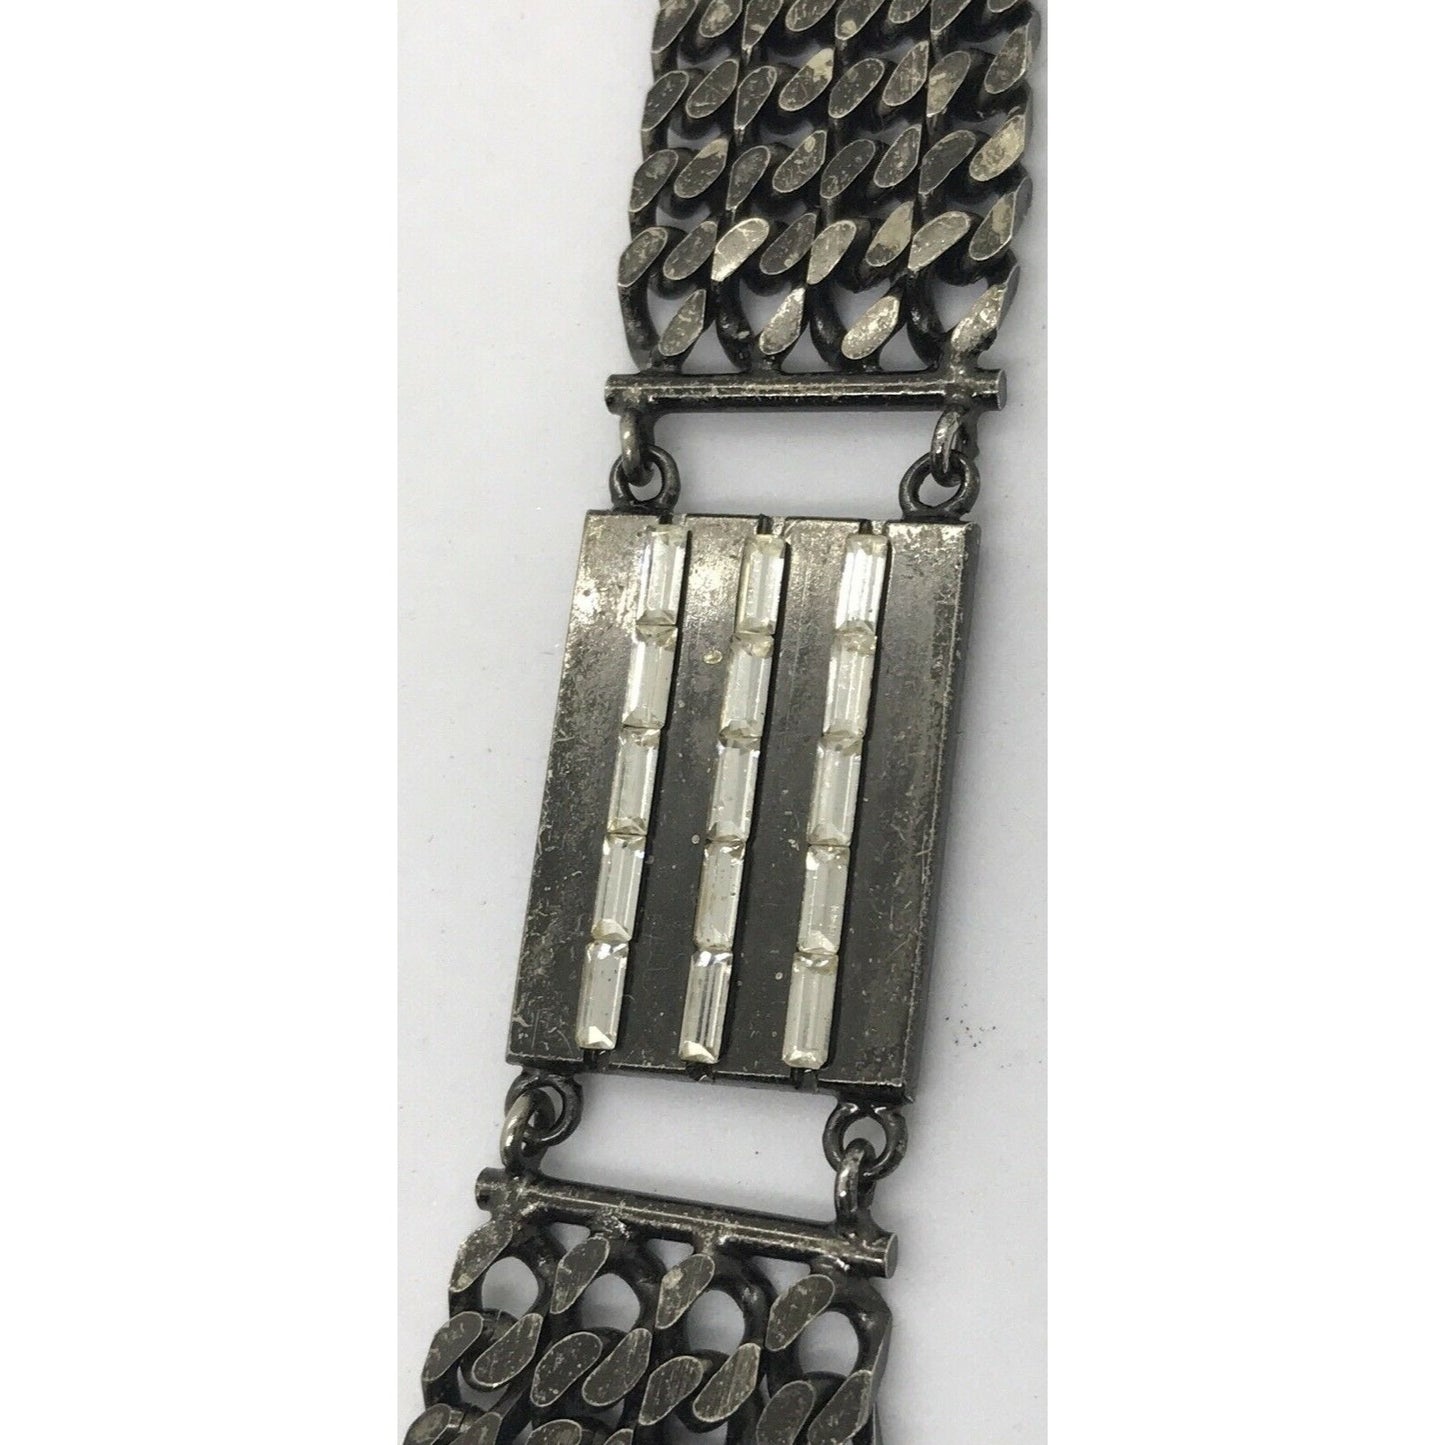 Vintage Gucci sterling silver chain belt with clear rhinestone crystals and a petite GG clasp/buckle